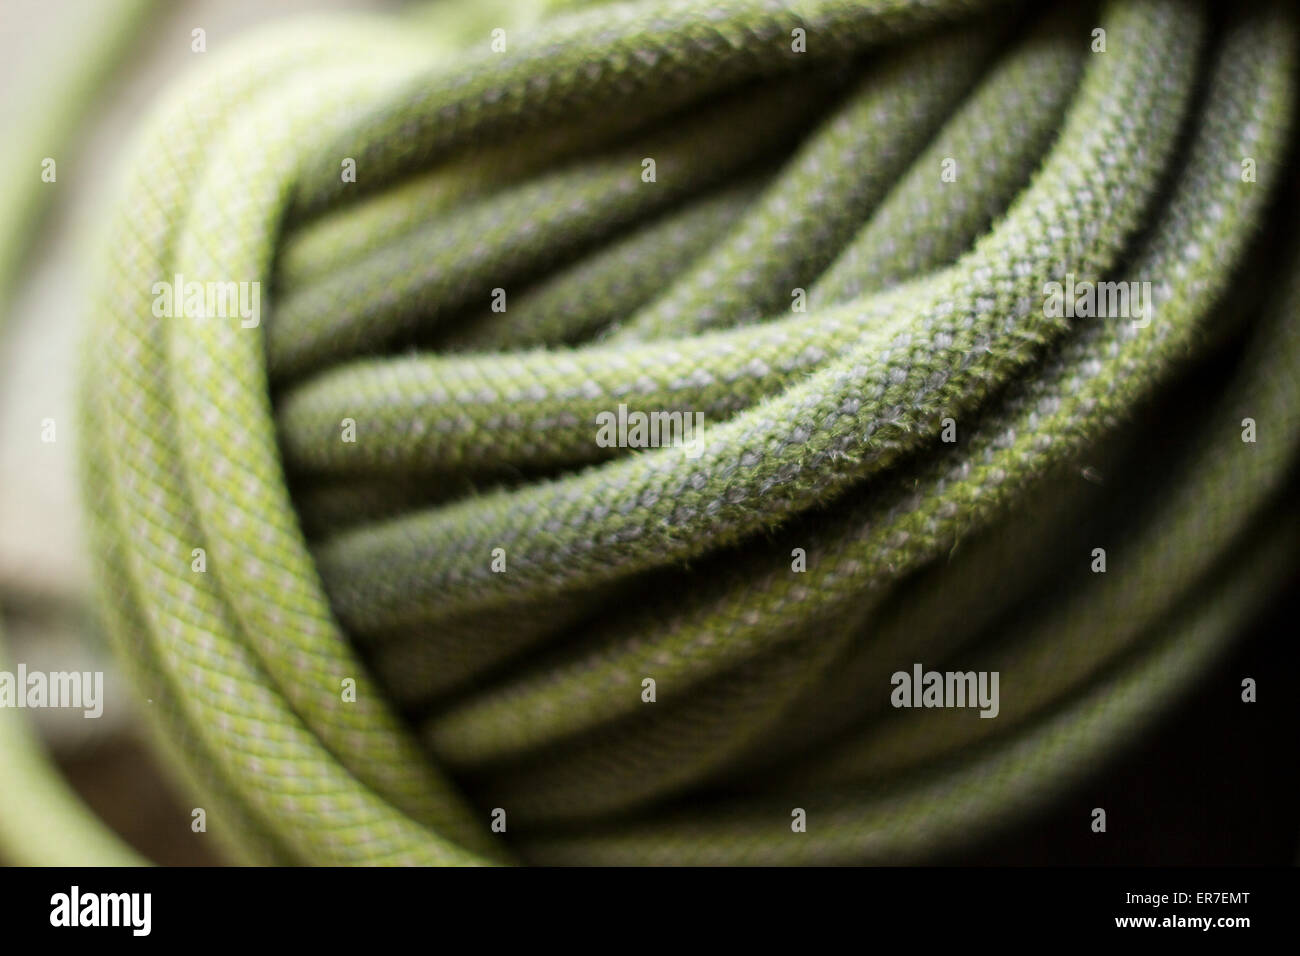 A close up of a coiled climbing rope. Stock Photo